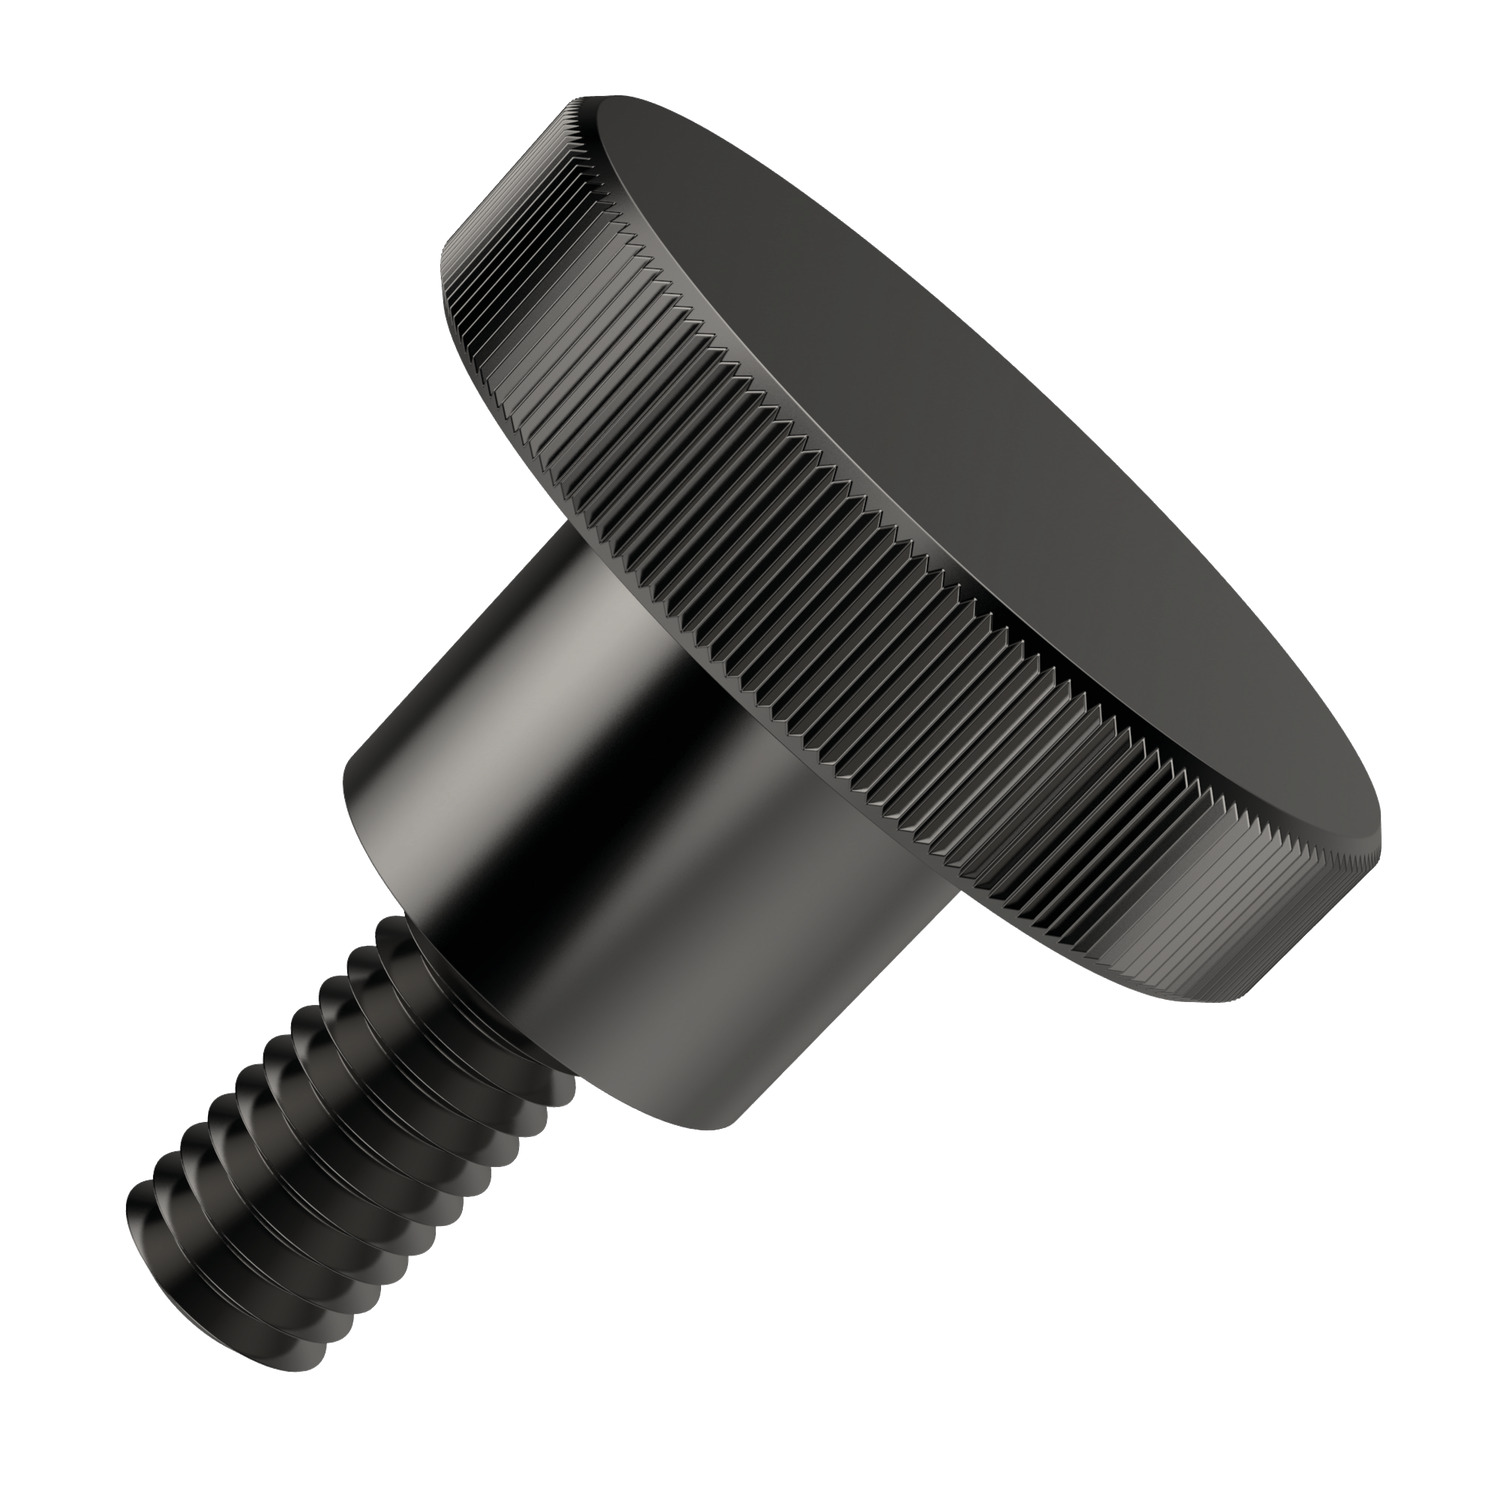 Knurled Thumb Screws This steel thumb screw comes with a shoulder and is manufactured to DIN 464 specification.